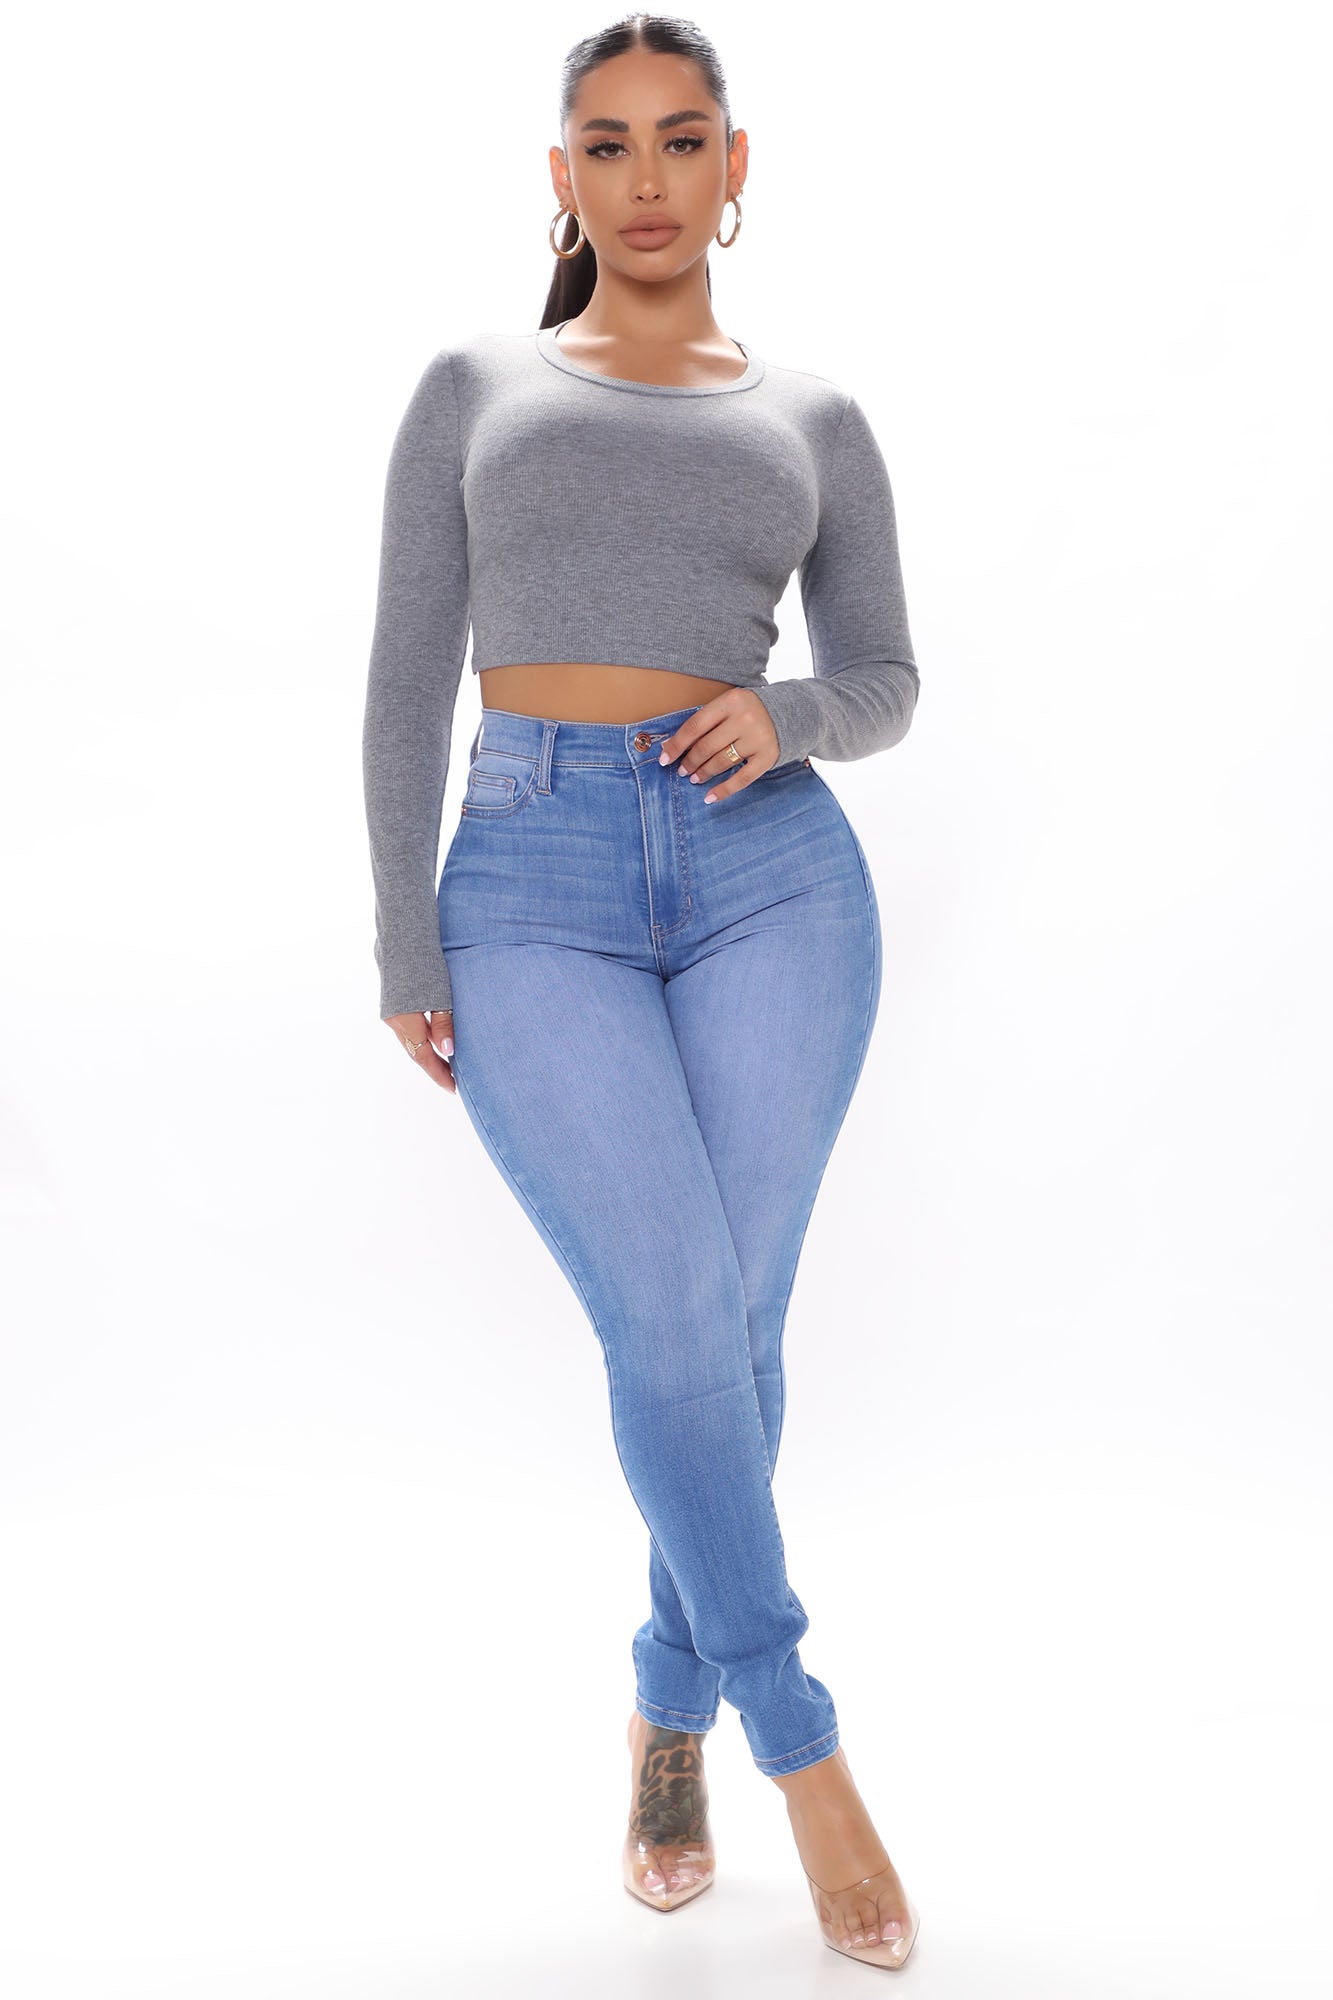 Show Off The Curves Super Stretch Booty Lifter Skinny Jeans - Medium Blue  Wash, Fashion Nova, Jeans